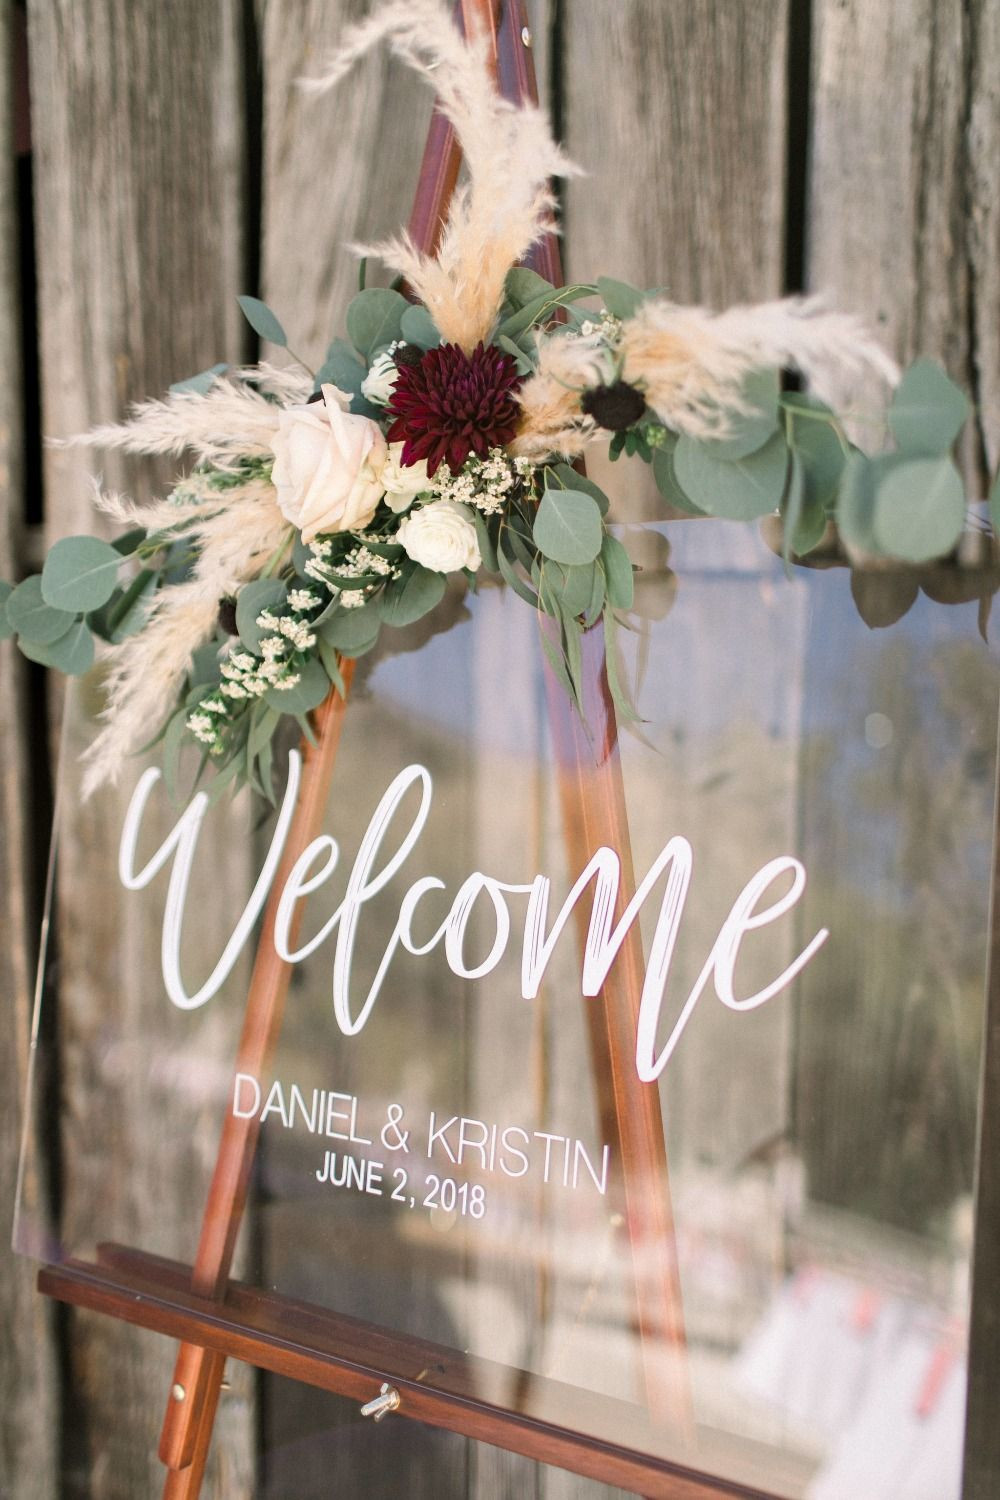 DIY Wedding Welcome Sign
 How To Have A DIY Wedding Without Hiring A Planner